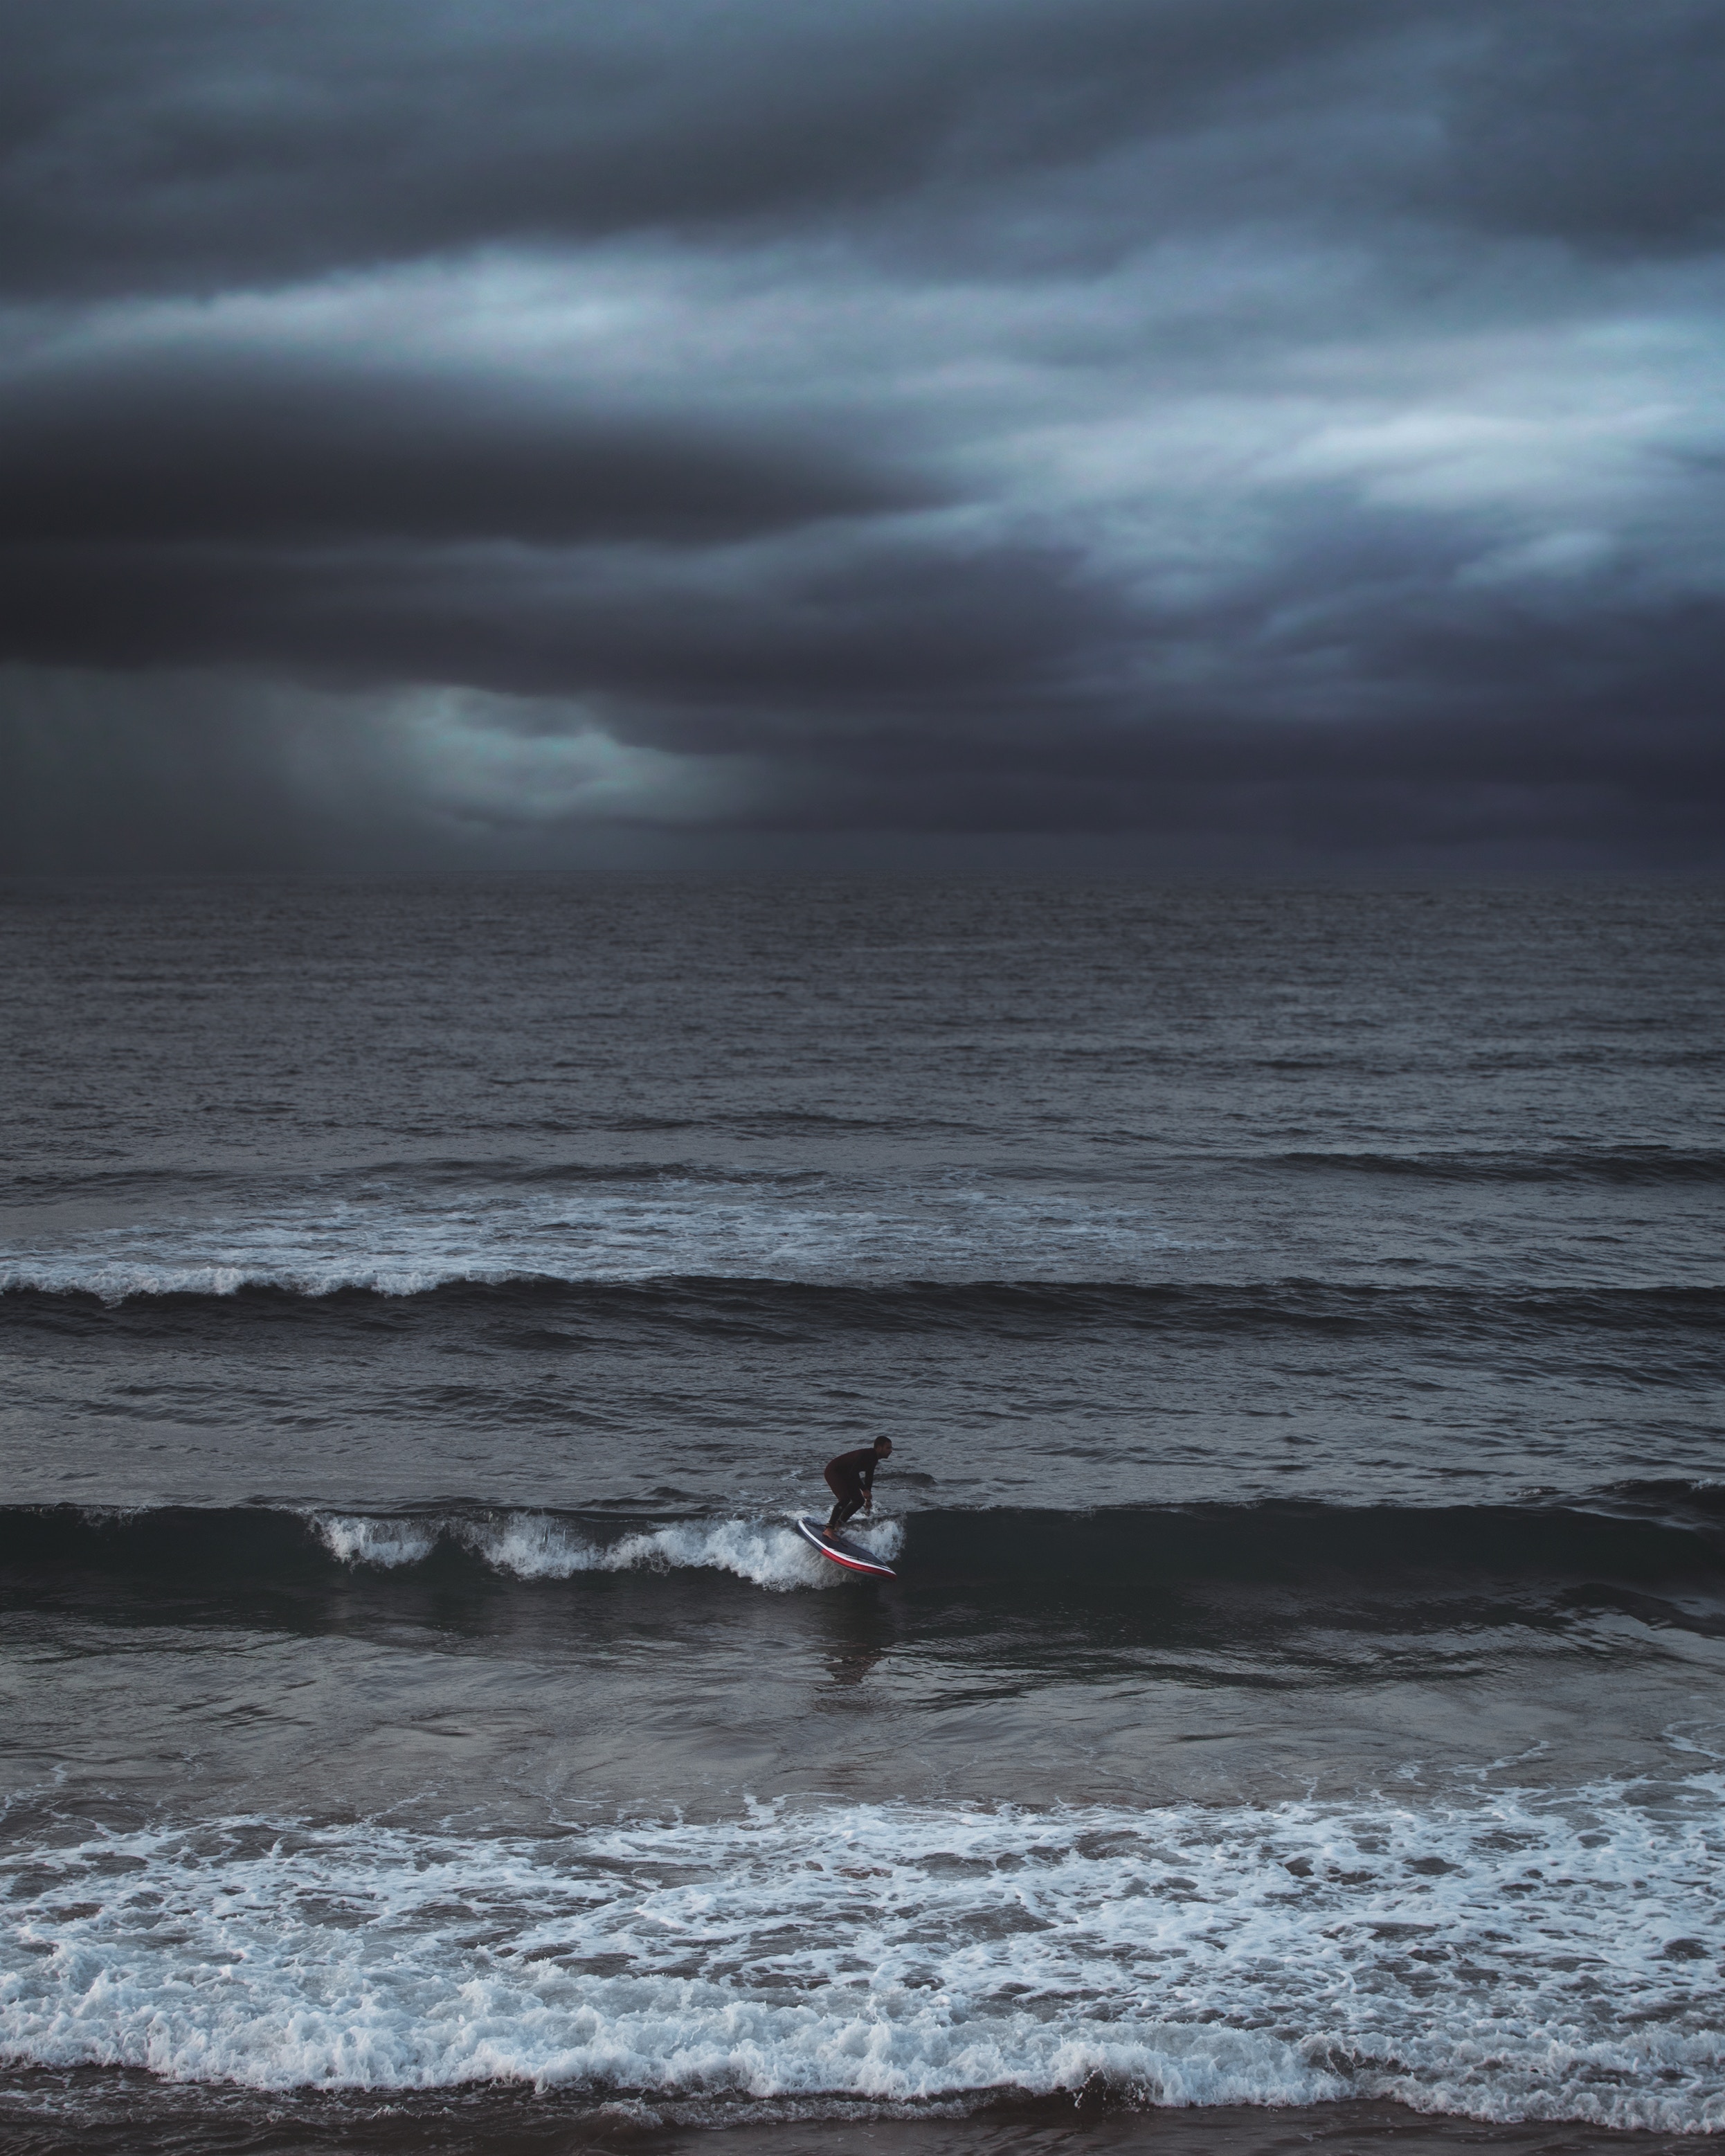 sea, serfing, sports, waves, ocean, mainly cloudy, overcast, surfer